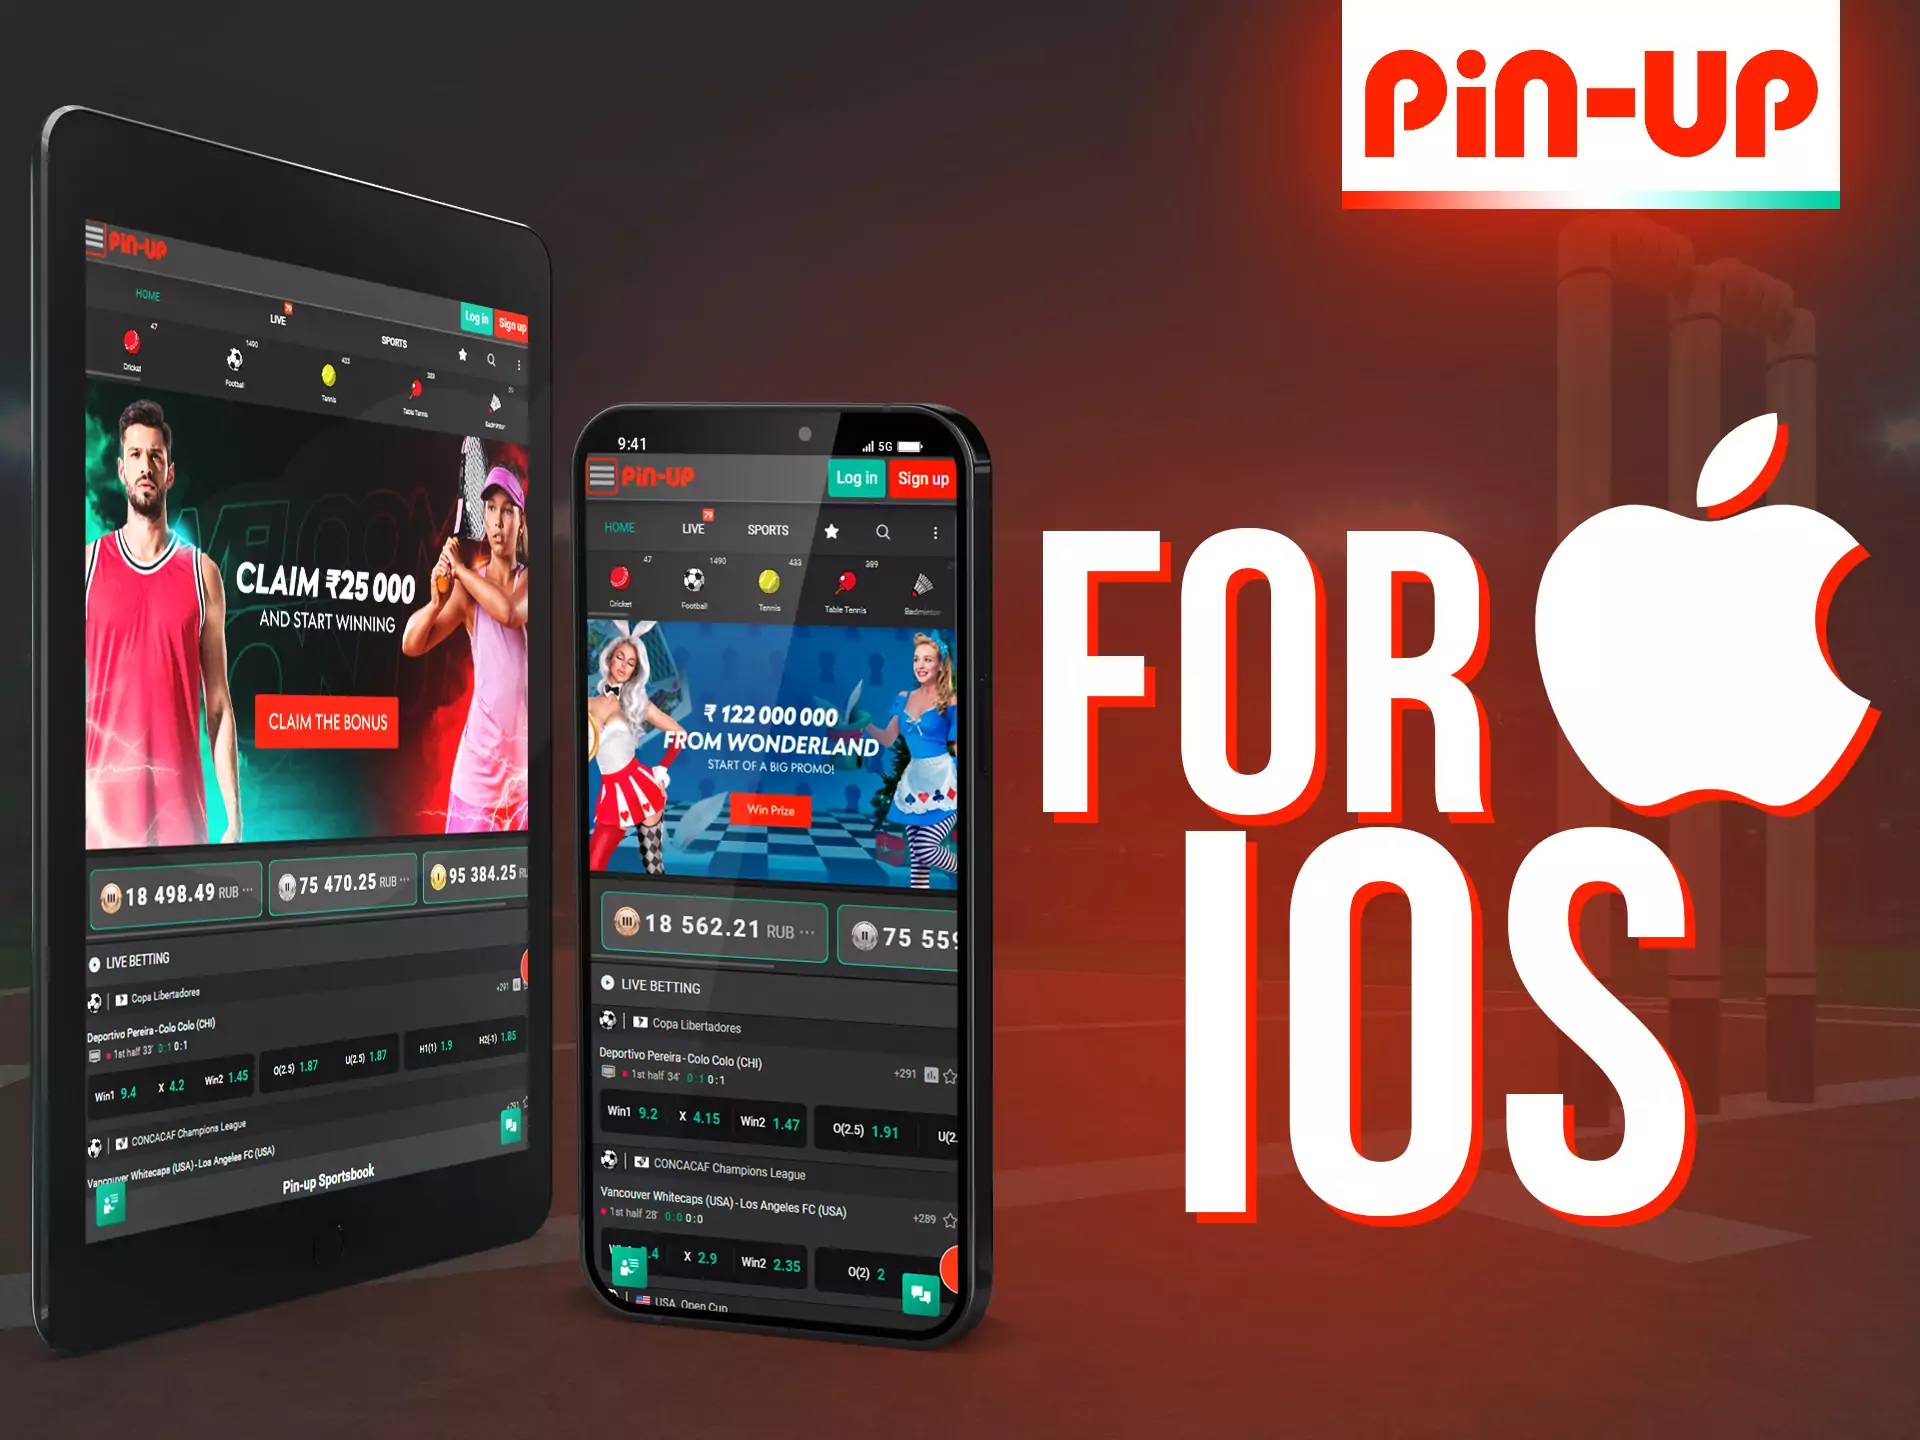 Install the Pin-Up app on your iOS device.